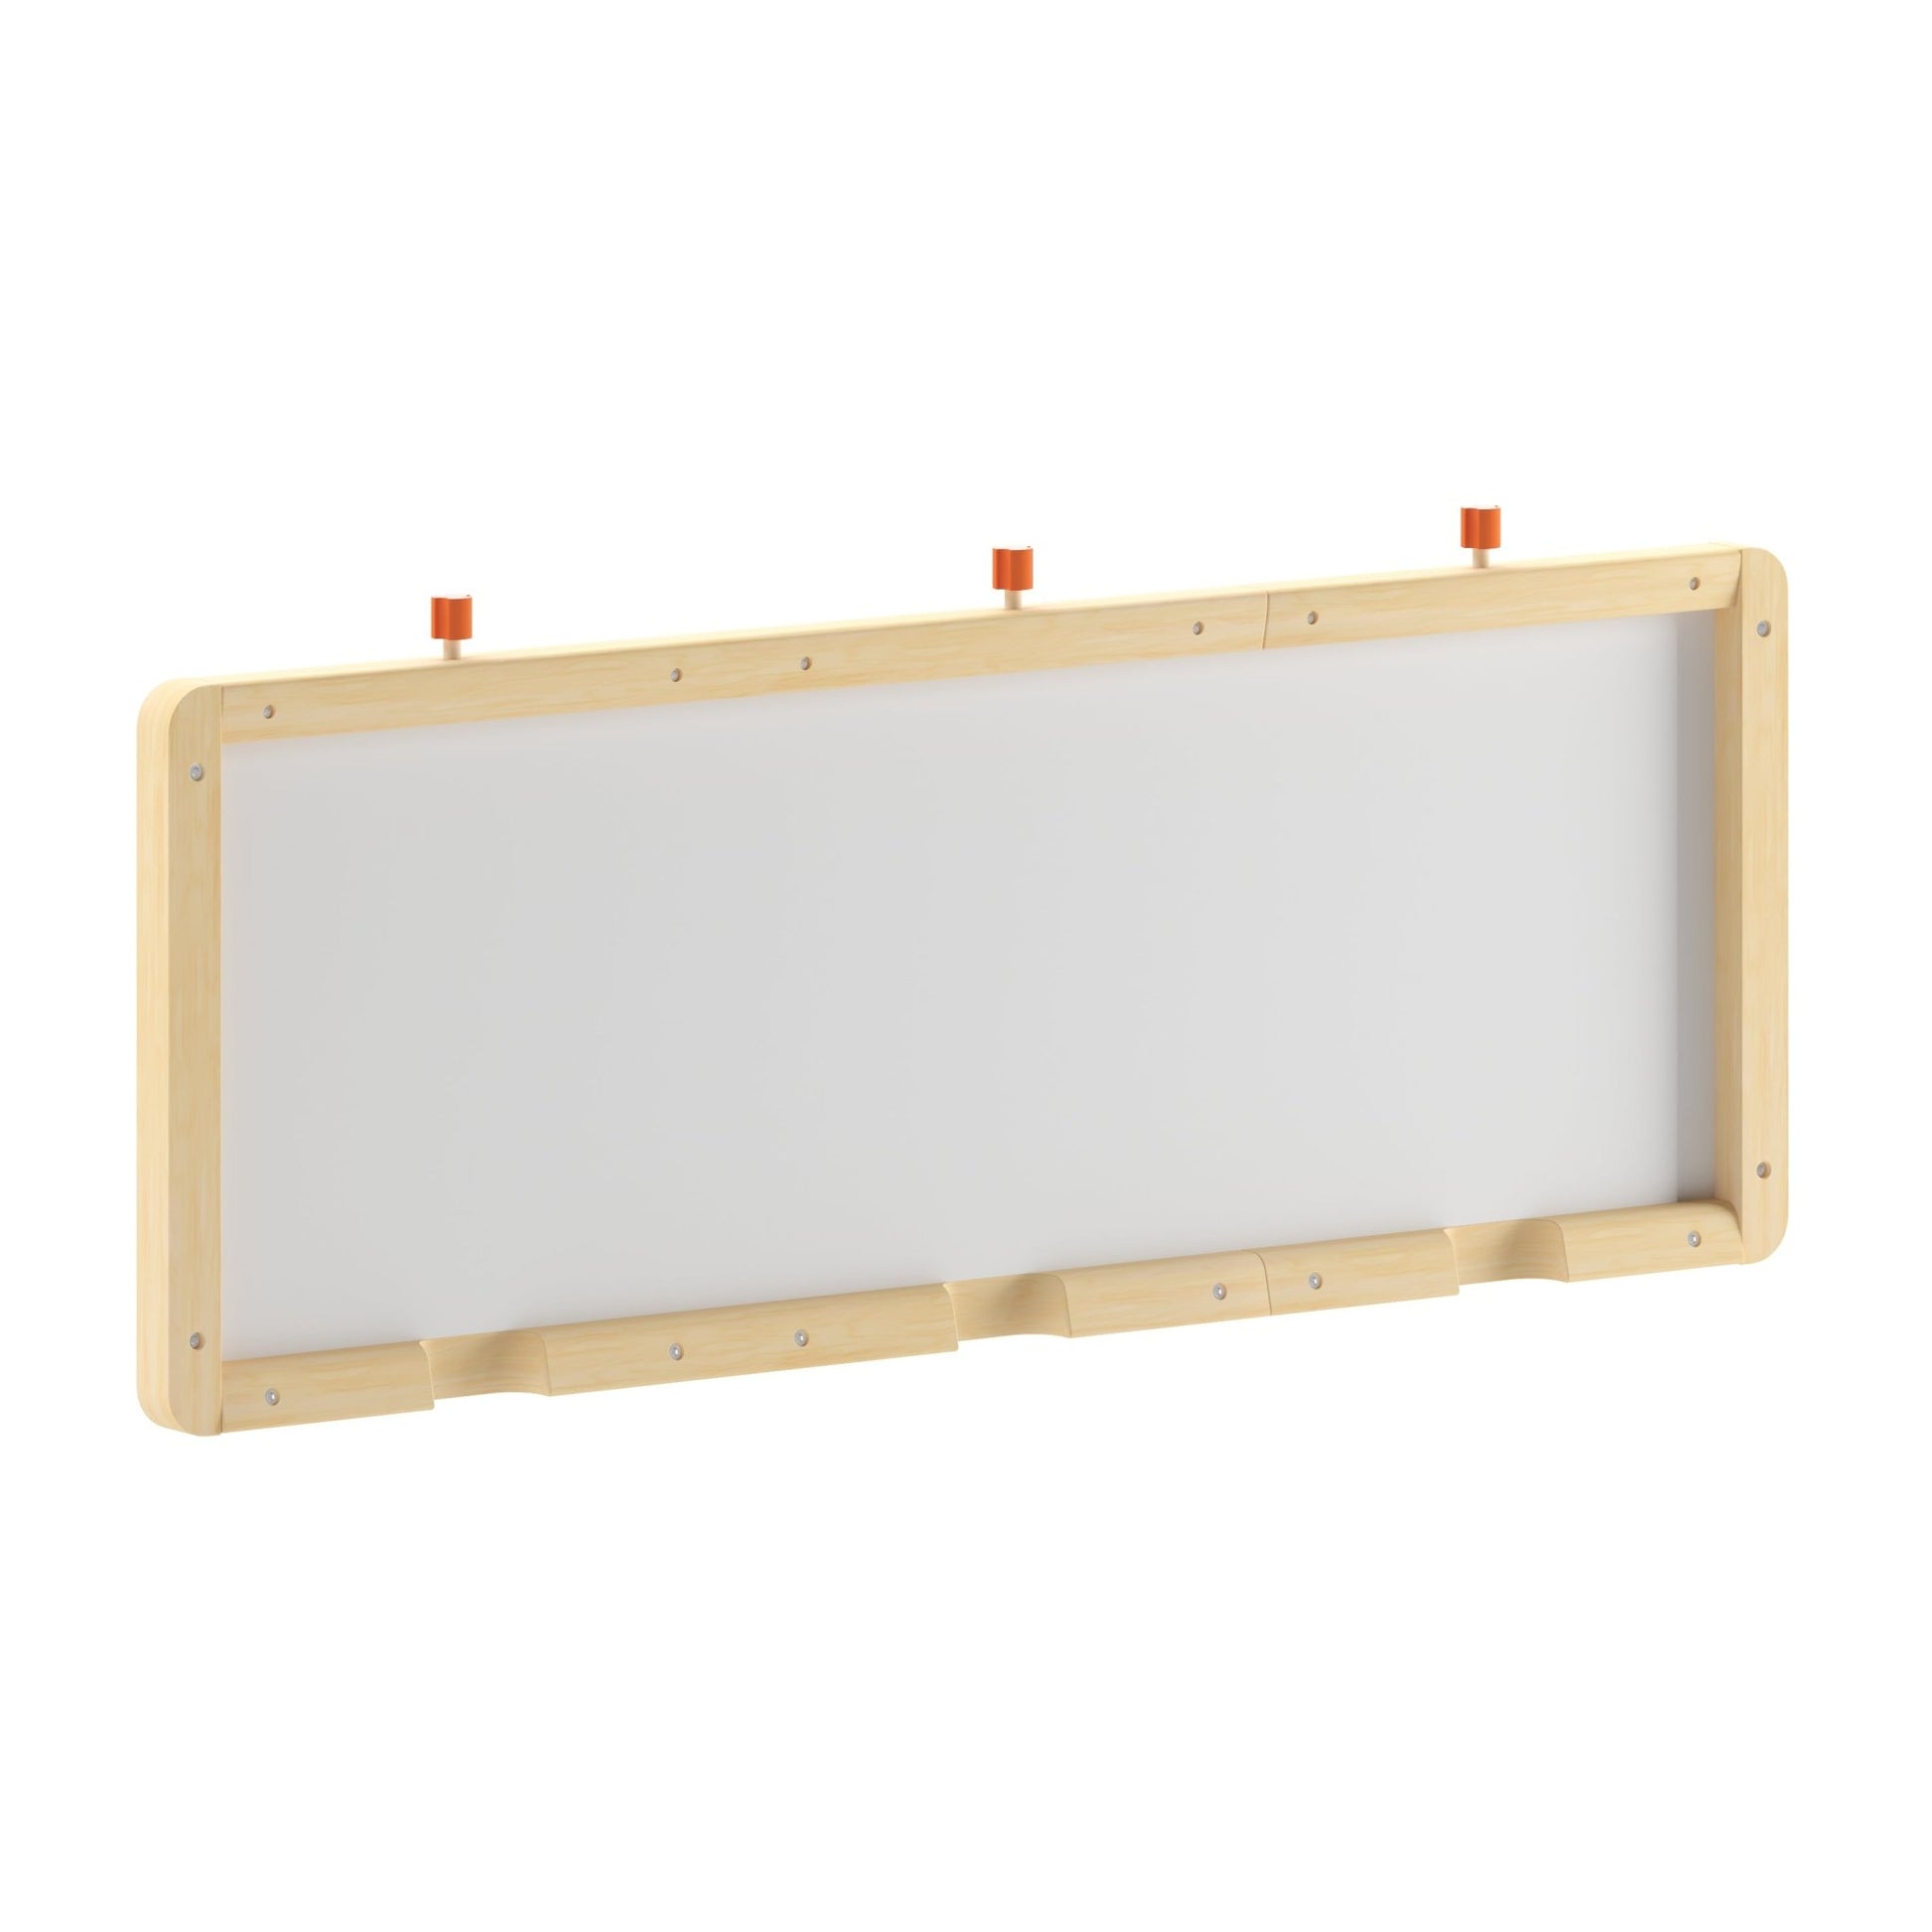 Bright Beginnings Commercial Grade Wooden Three Panel STEAM Wall System - SchoolOutlet